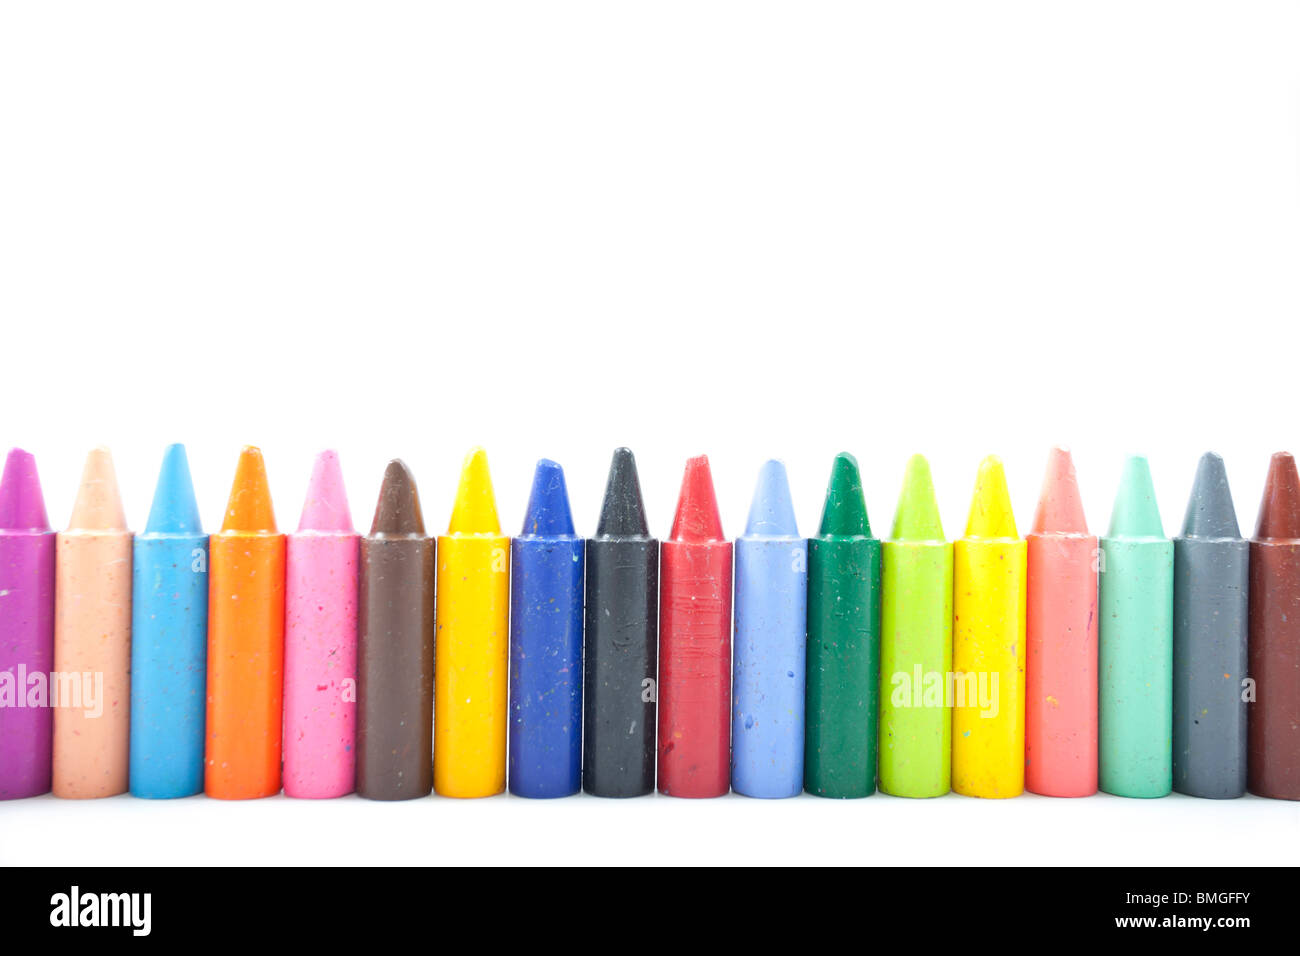 line of wax crayons on white background Stock Photo